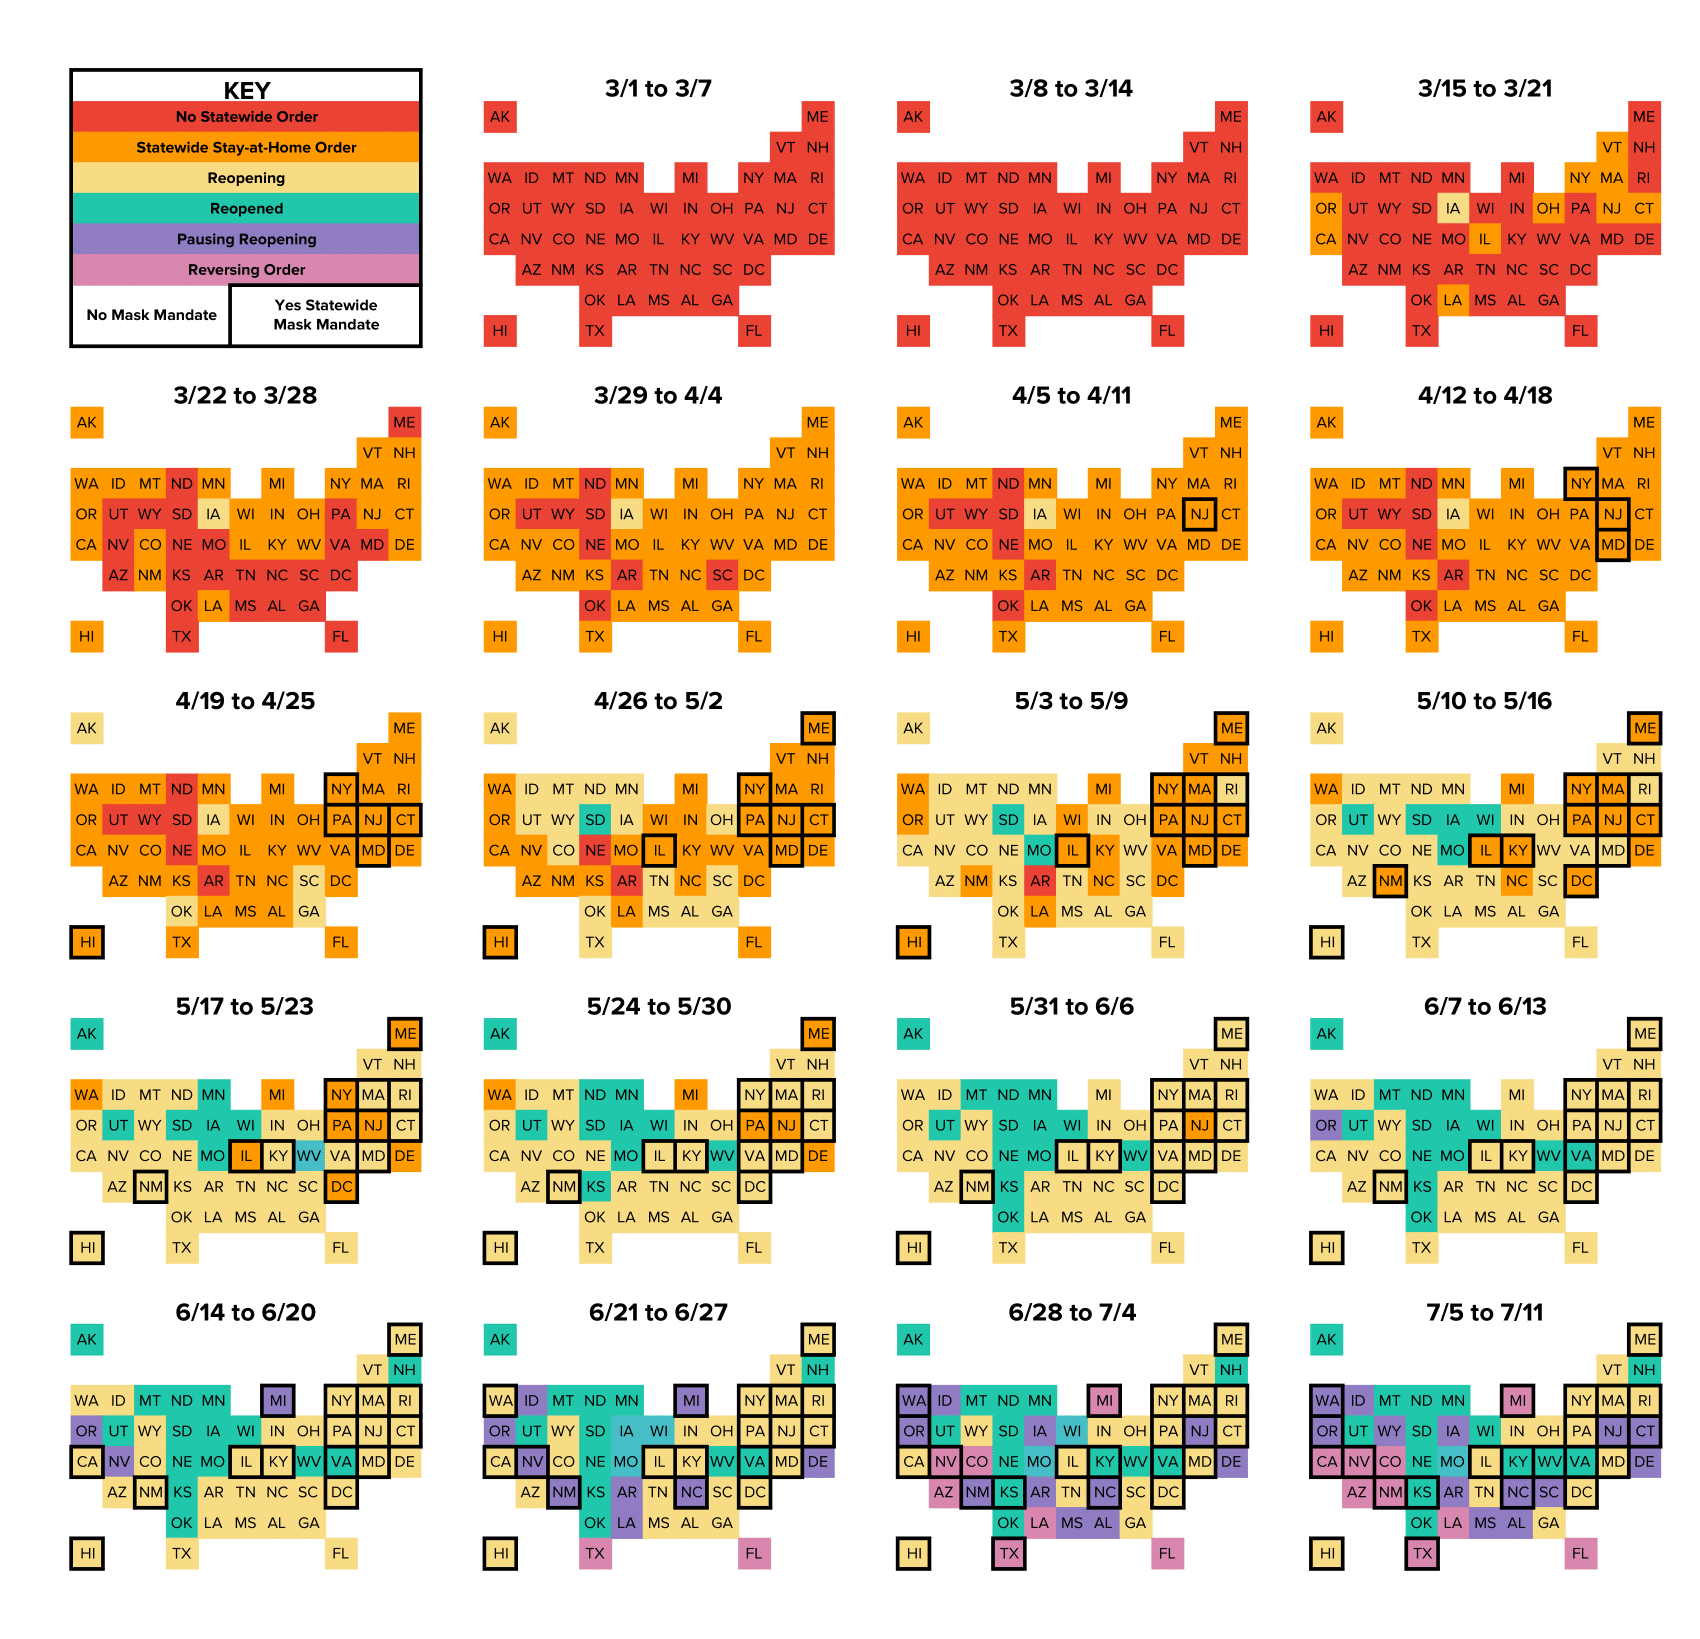 statewide reopening and mask mandate map by week